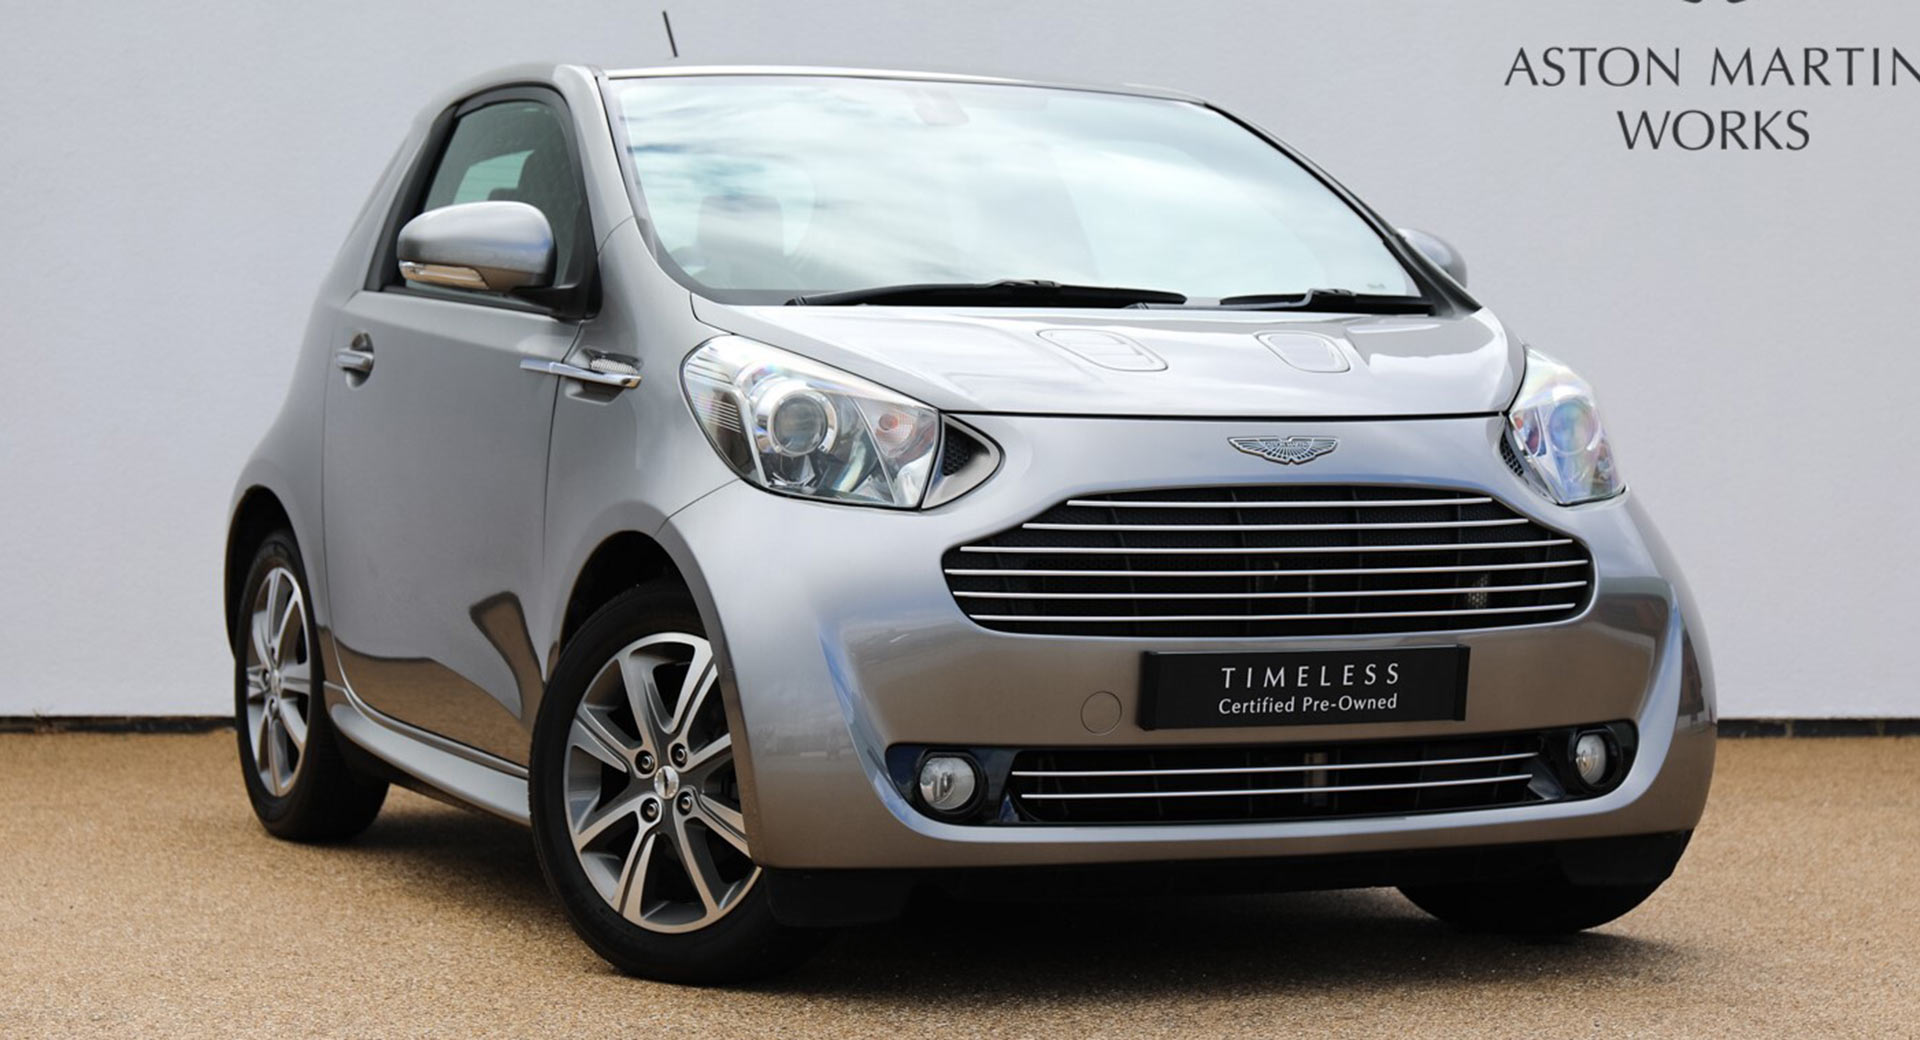 Would You Pay Almost $50,000 For This Aston Martin Cygnet? | Carscoops